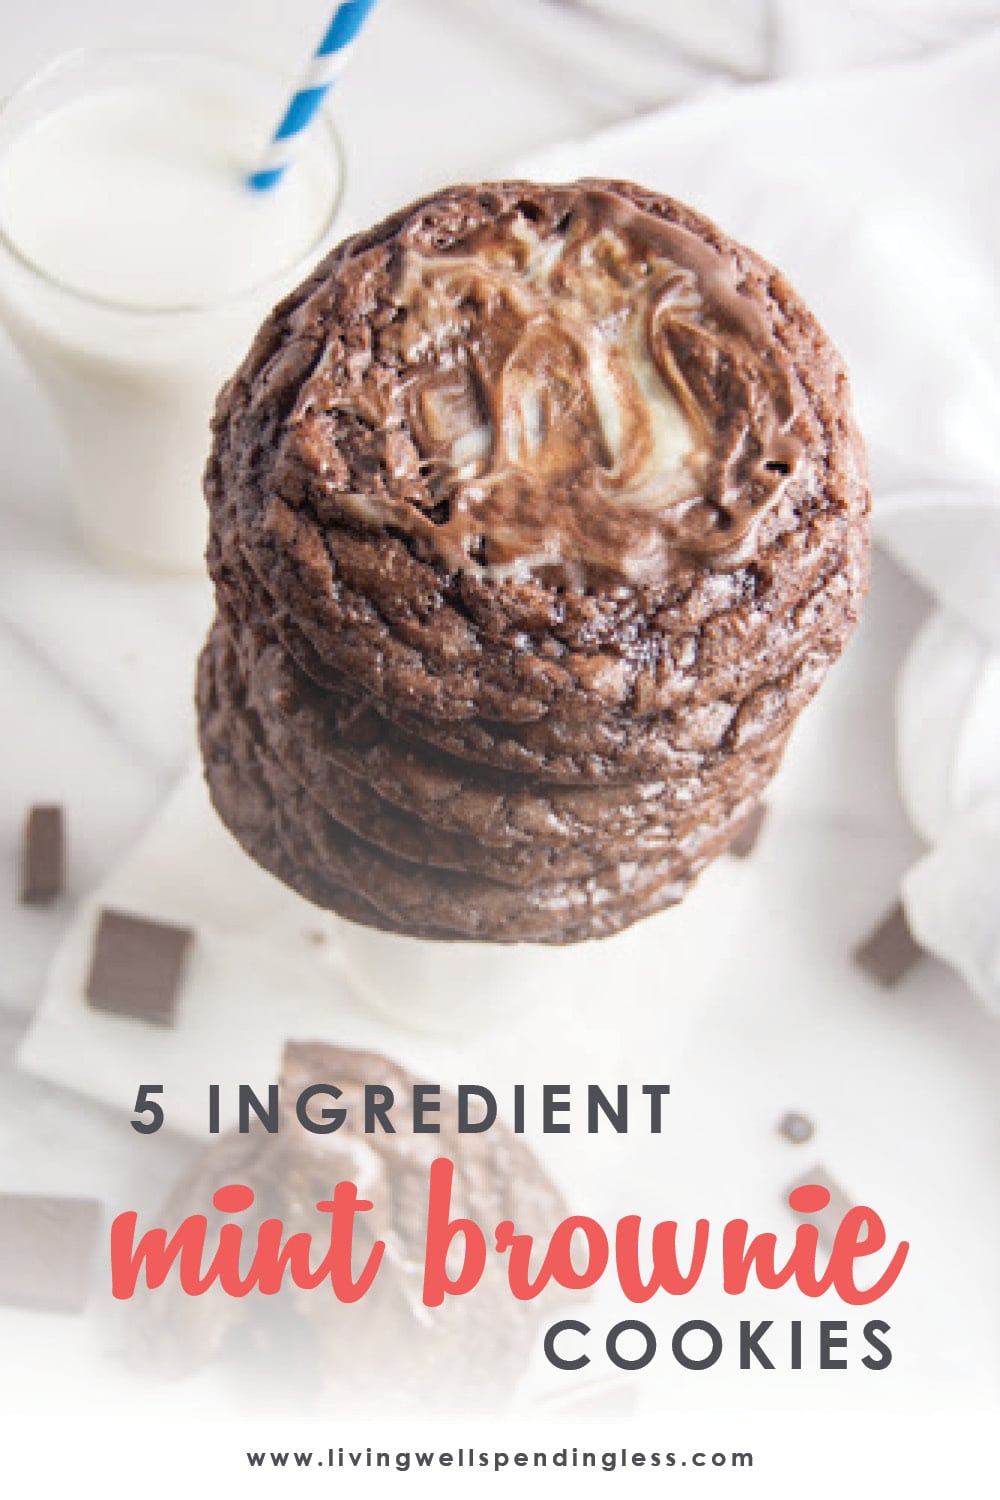 Need a go-to holiday cookie recipe you can whip up FAST? These ridiculously delicious Mint Brownie Cookies are deceptively easy and come together in minutes with just five simple ingredients. Consider this your Christmas miracle! (You're welcome!) #recipes #cookierecipes #mintchocolate #brownierecipes #5ingredientsorless #holidayrecipes #dessertrecipes #easyrecipes